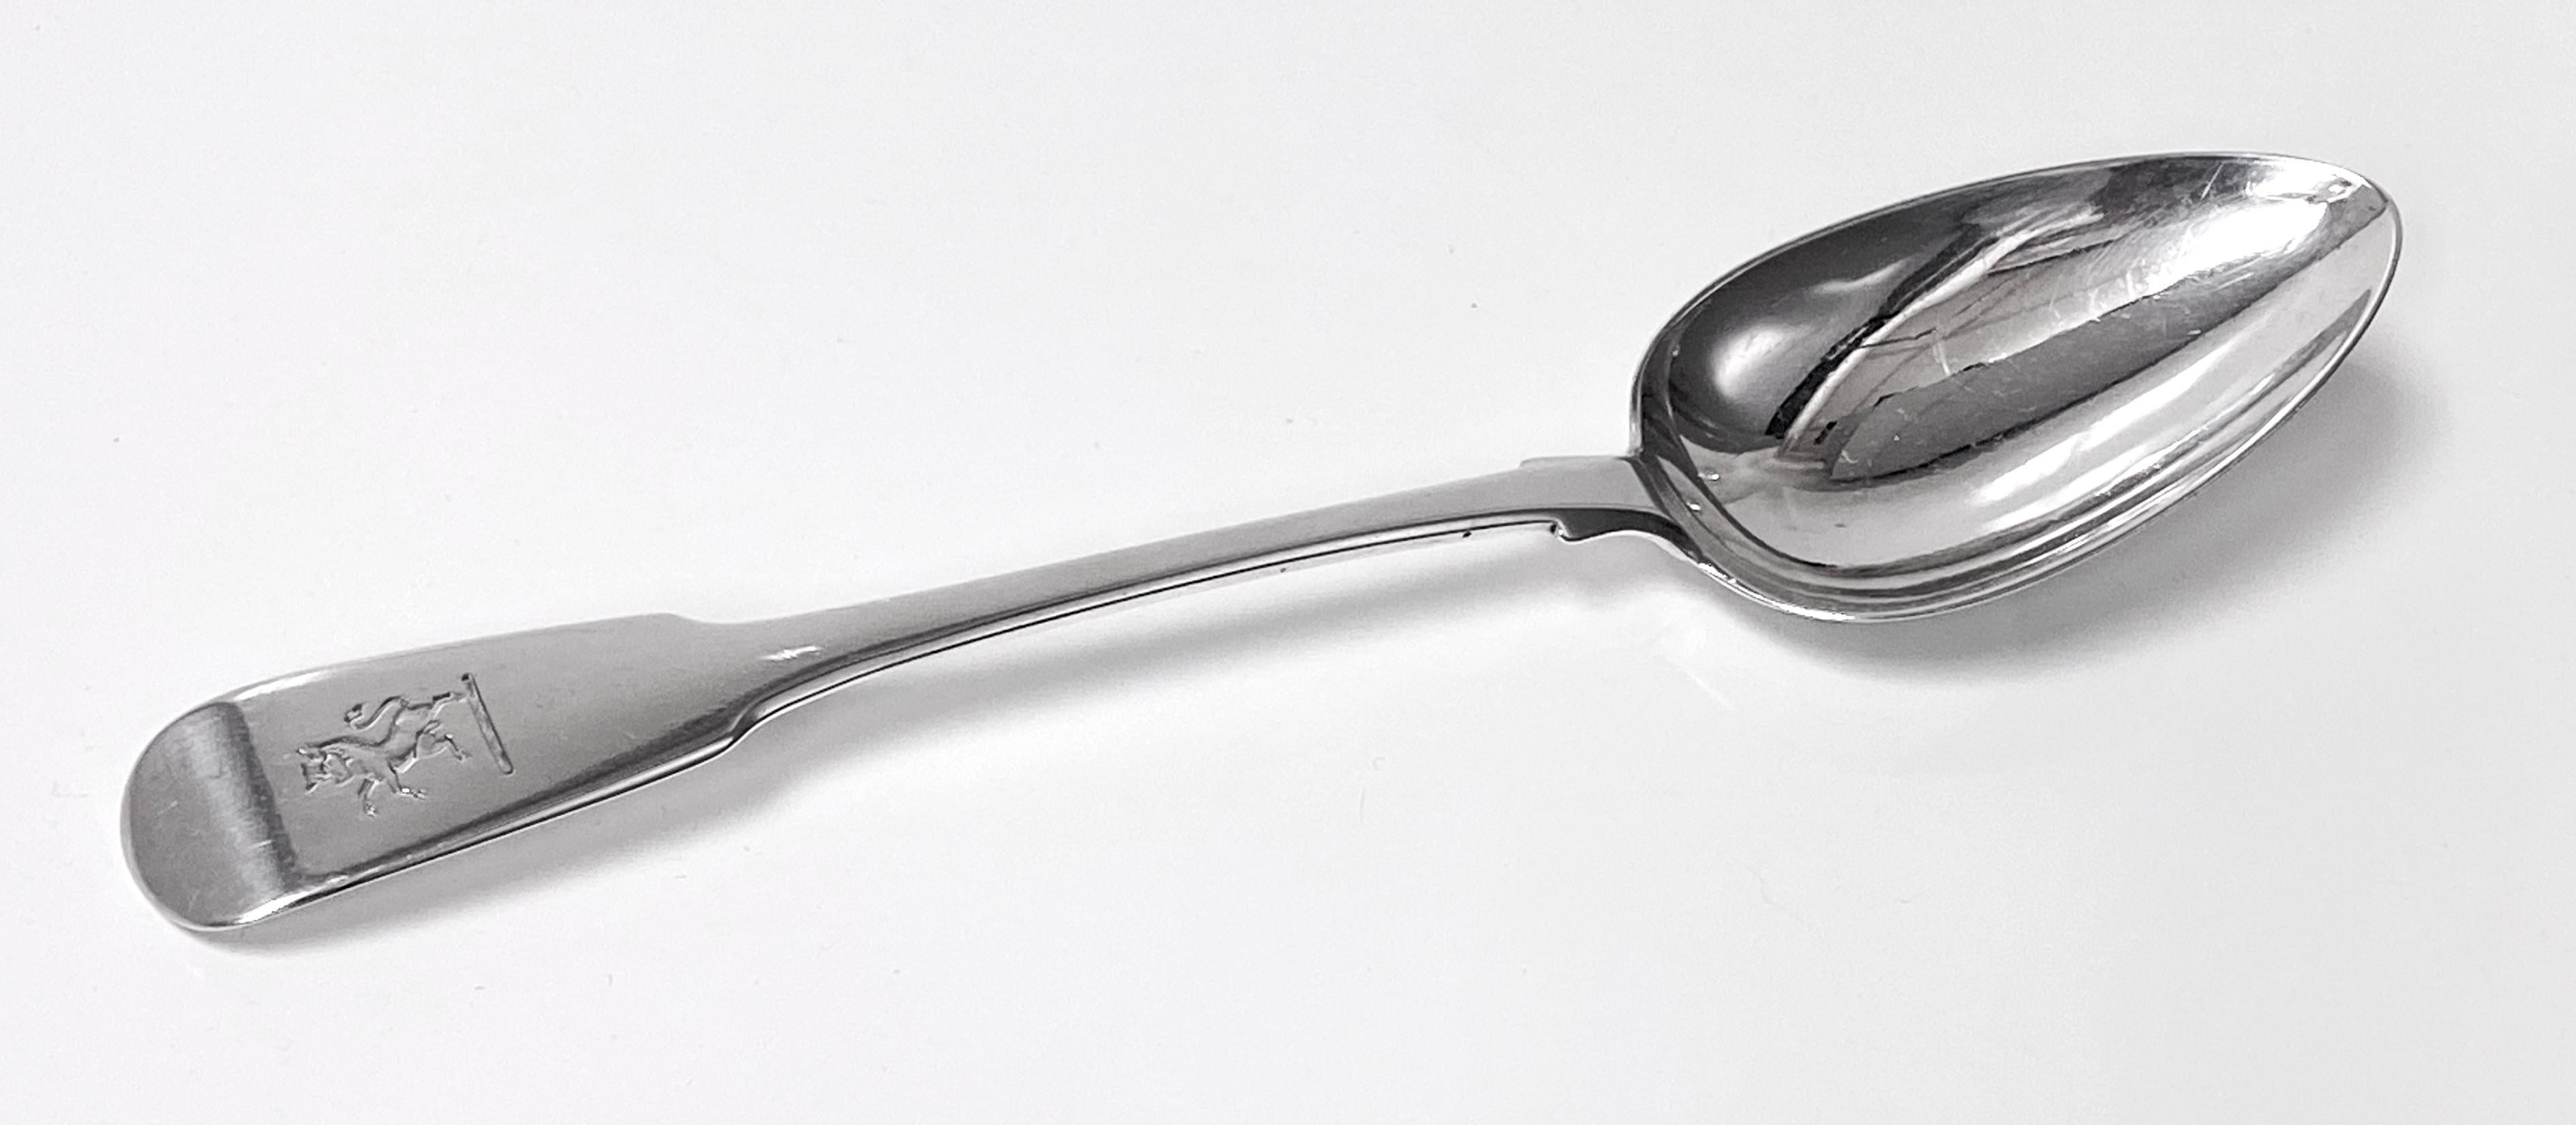 Scottish Antique Silver large Spoon Glasgow 1831 AS. Plain Fiddle pattern engraved with crest. Good condition, clear hallmarks. Reflections from photography only. Length: 9 inches. Weight: 67.20 grams 